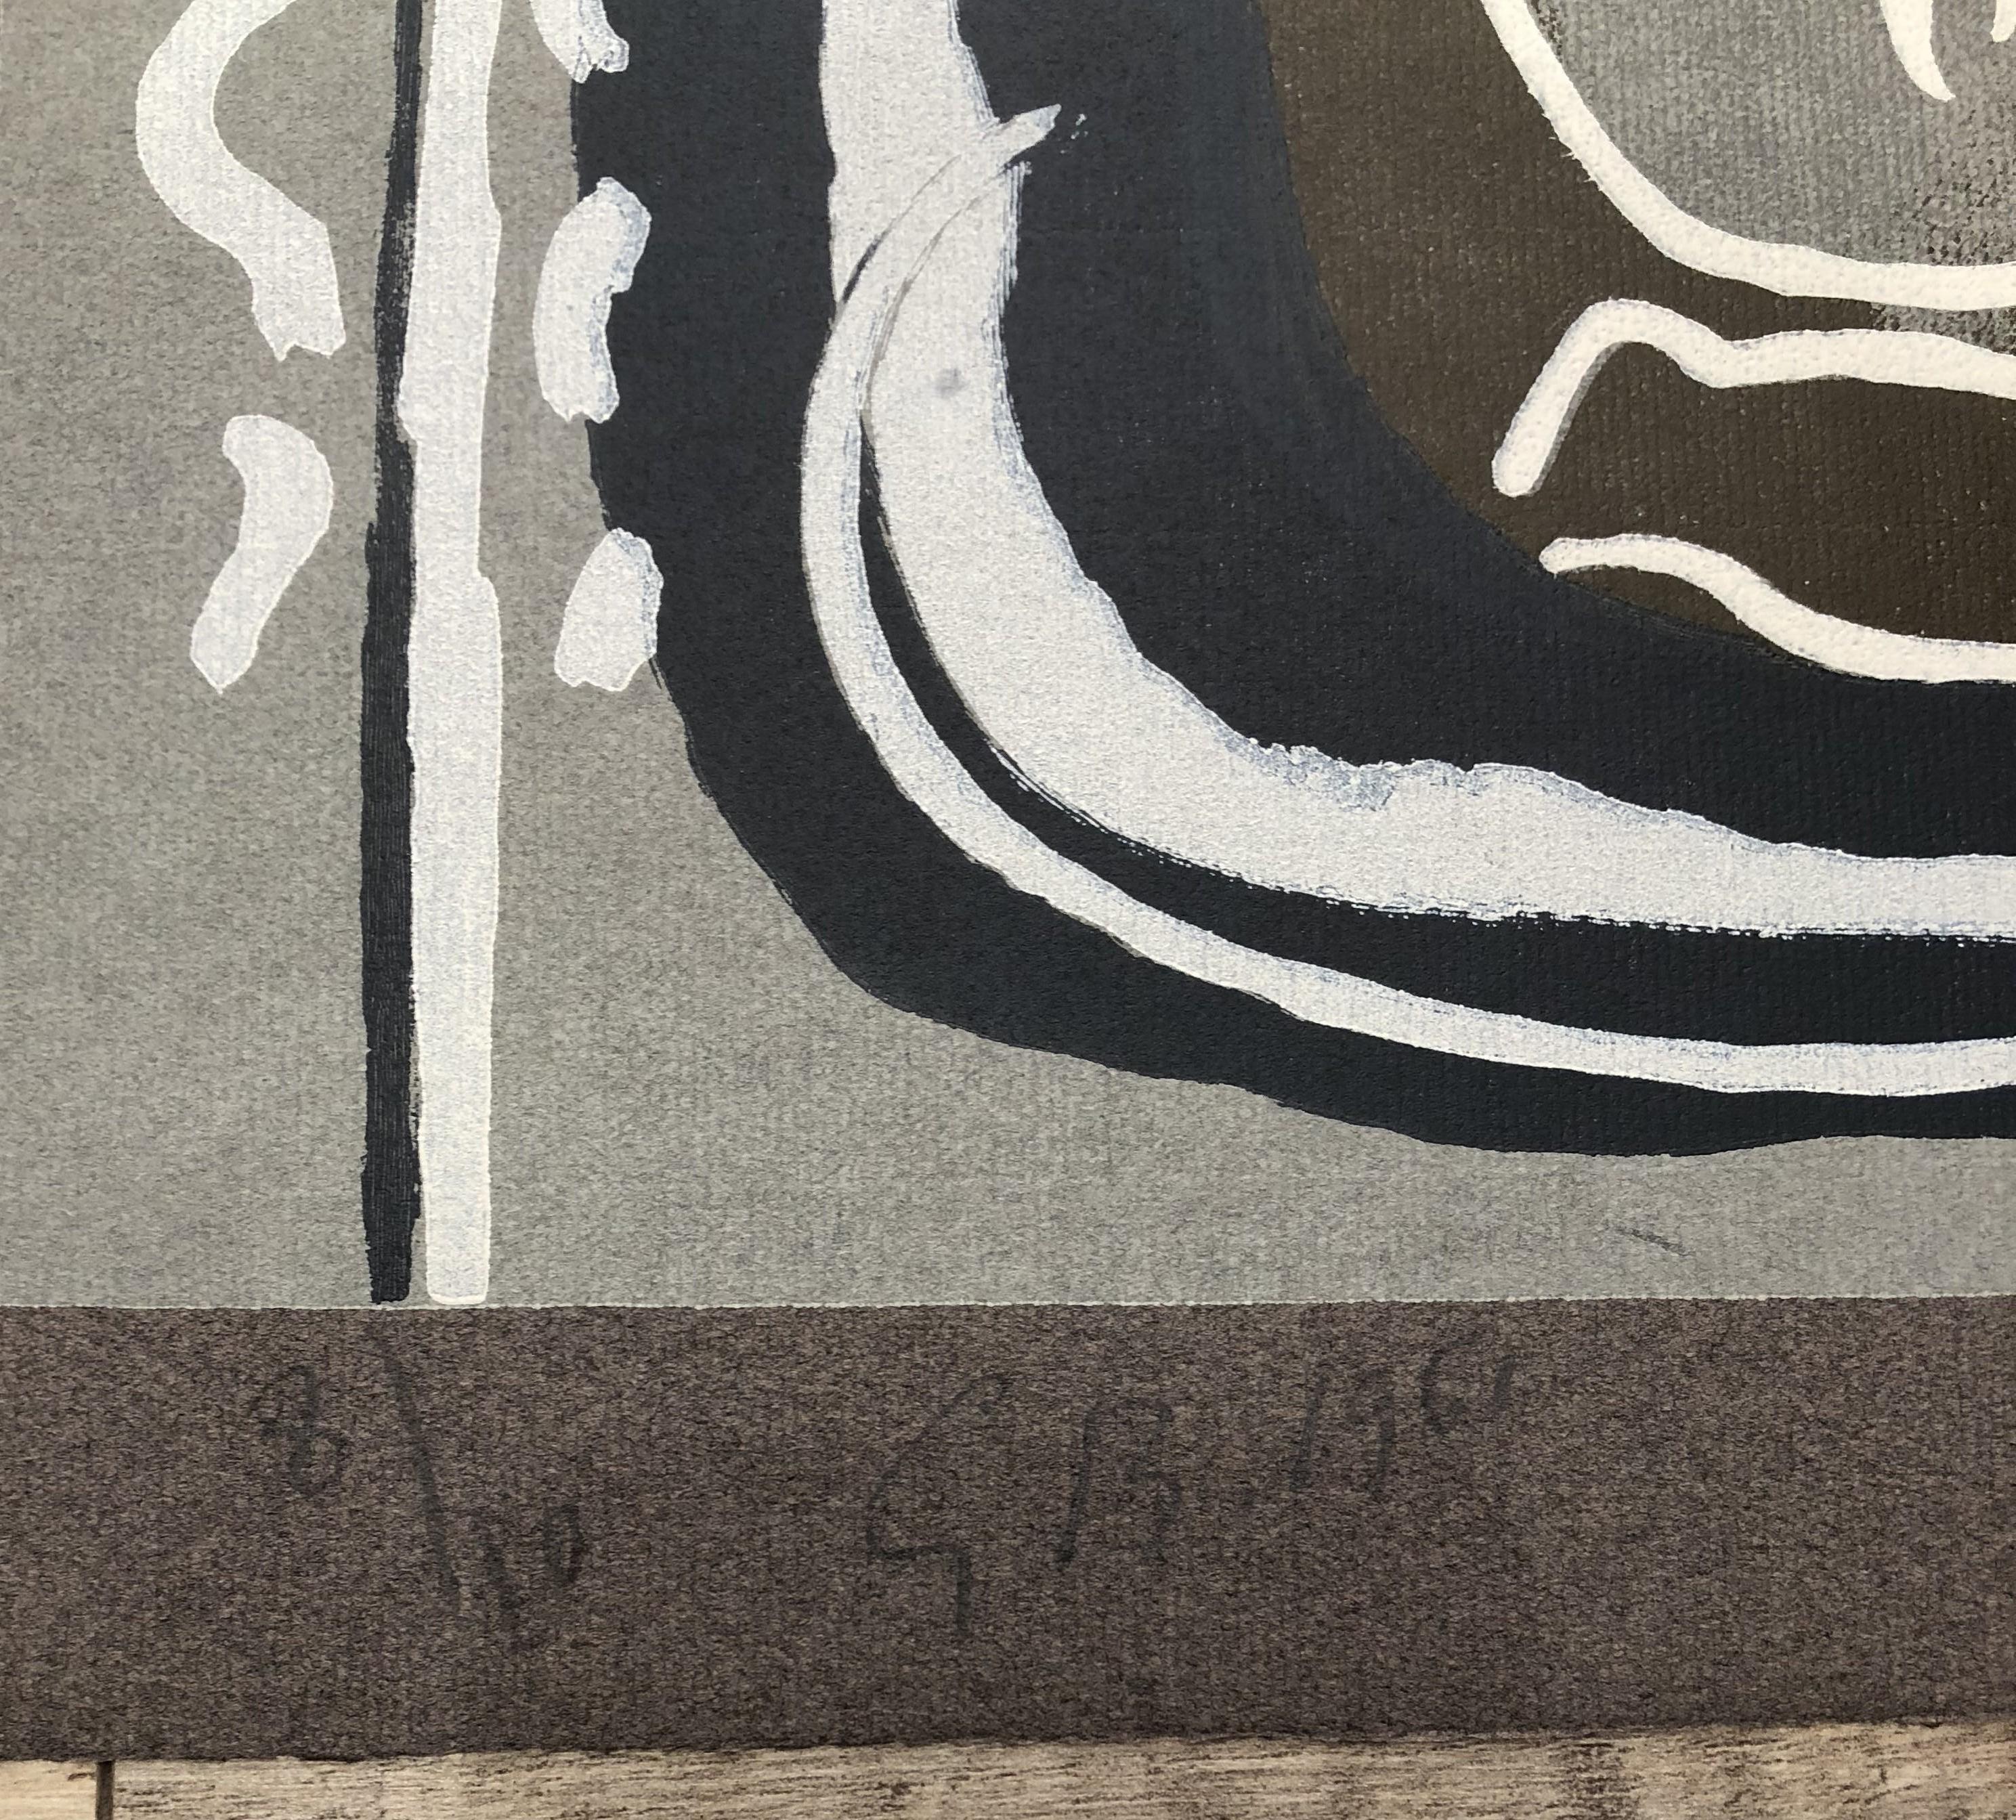 Georges BRAQUE
White Flowers (si je mourais la bas)

Original woodcut, 1962
Handsigned in pencil and monogrammed
Numbered / 10 copies (Edition of 75 copies + 10 copies on brown paper)
Very good condition
Size 47 x 36 cm, on brown paper

REFERENCE :